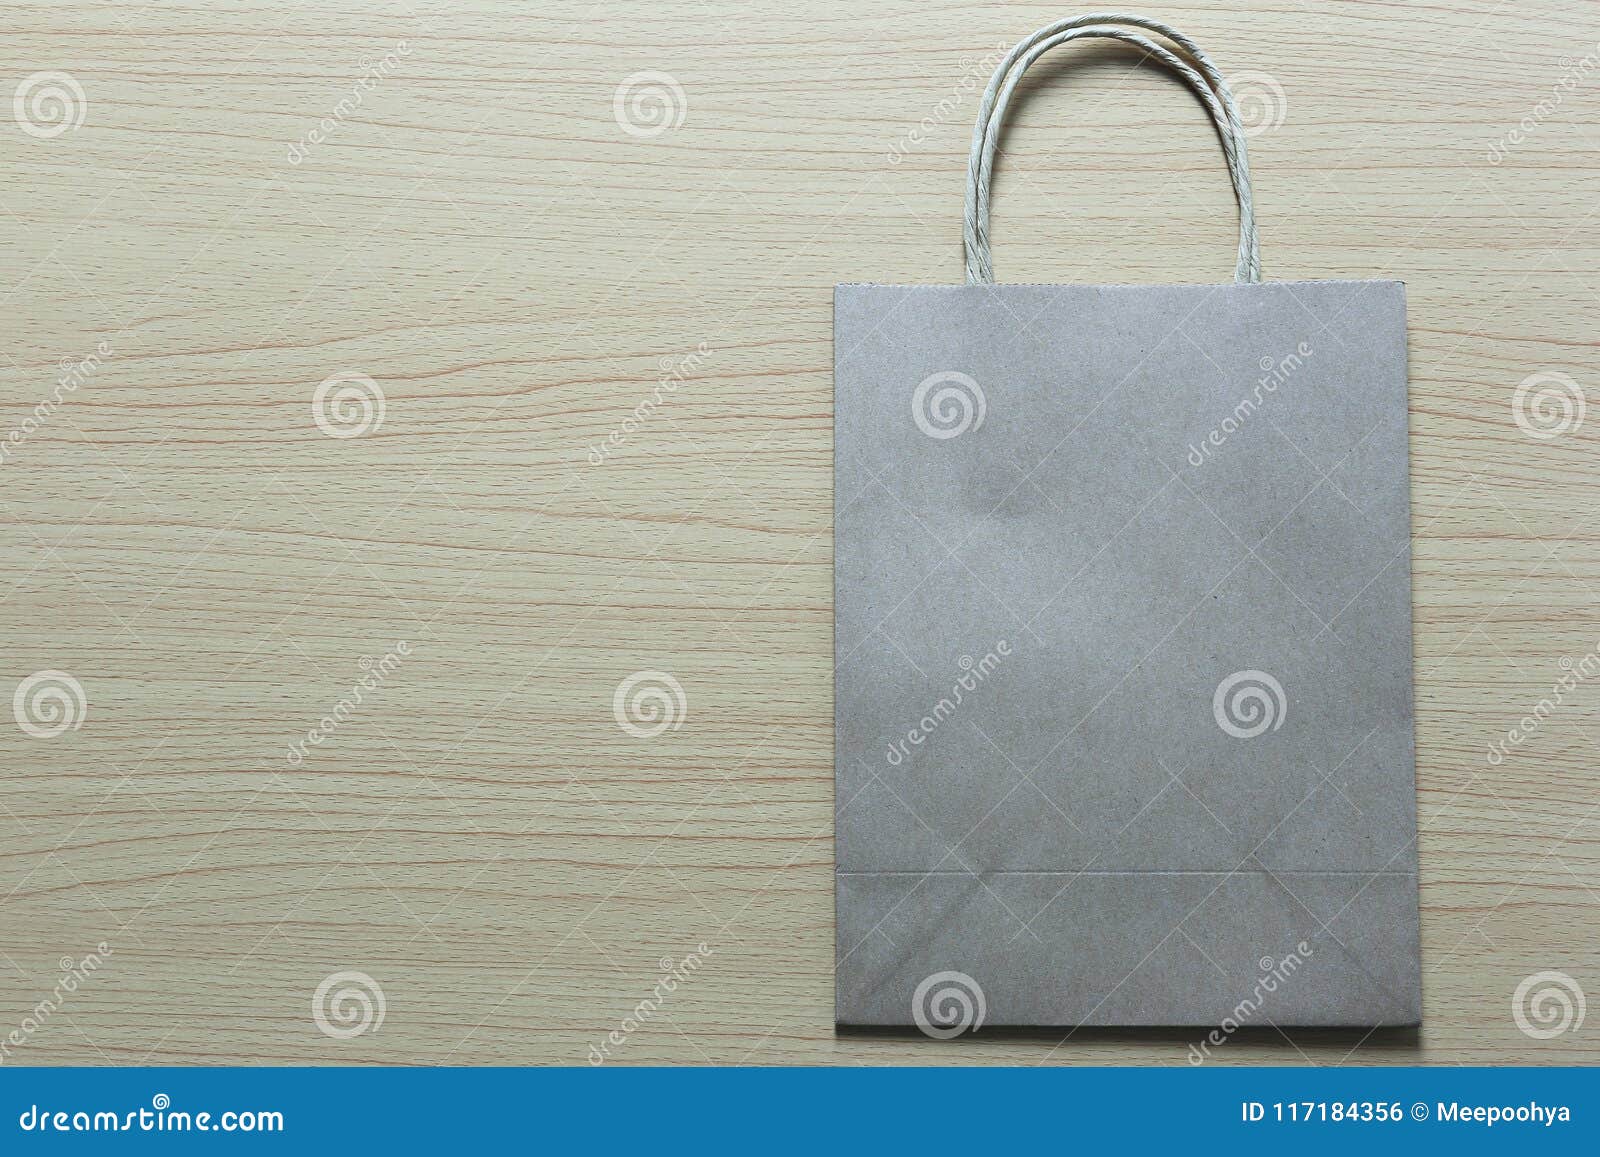 Brown Paper Bag Is Placed On A Brown Wooden Floor Stock Photo